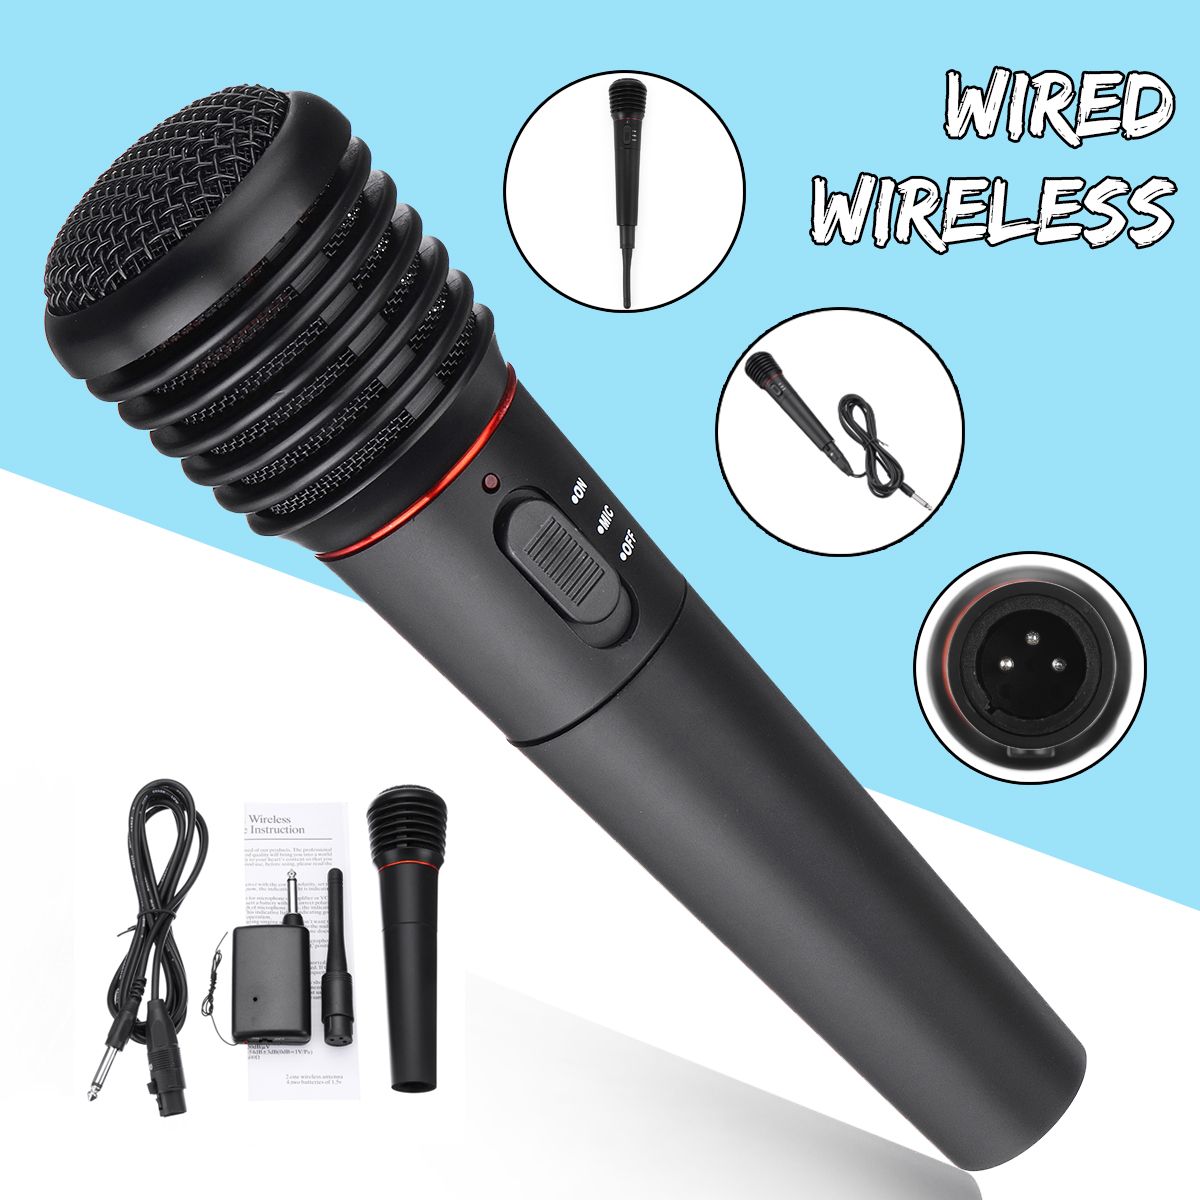 2In1-Professional-Wired-Wireless-Handheld-Microphone-Mic-Dynamic-Cordless-for-KTV-Karaoke-Recording-1518191